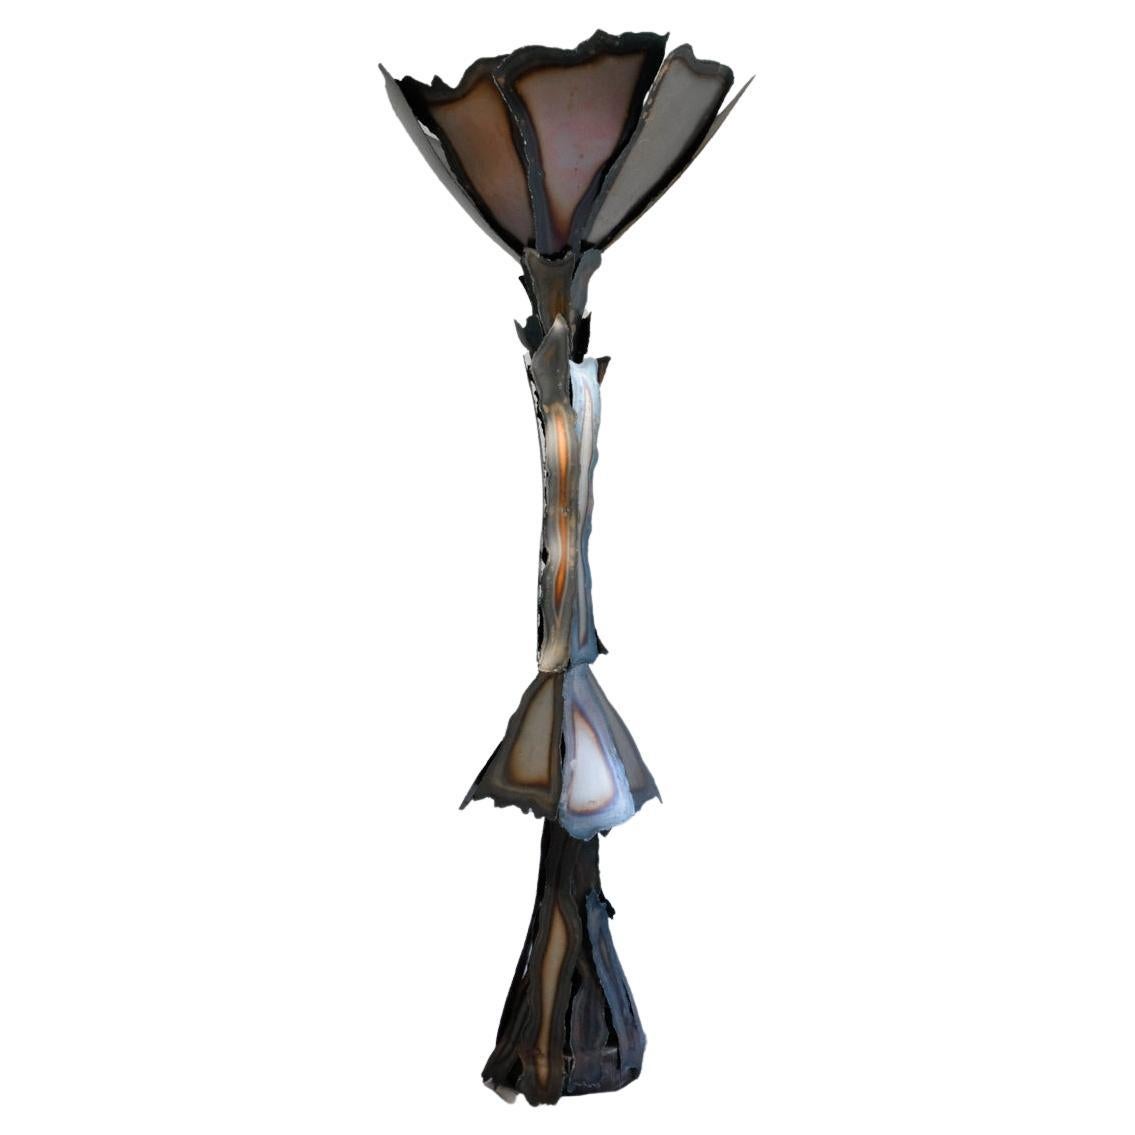 Floor Lamp Made of Cut and Oxidized Steel Sheets, French production 1980